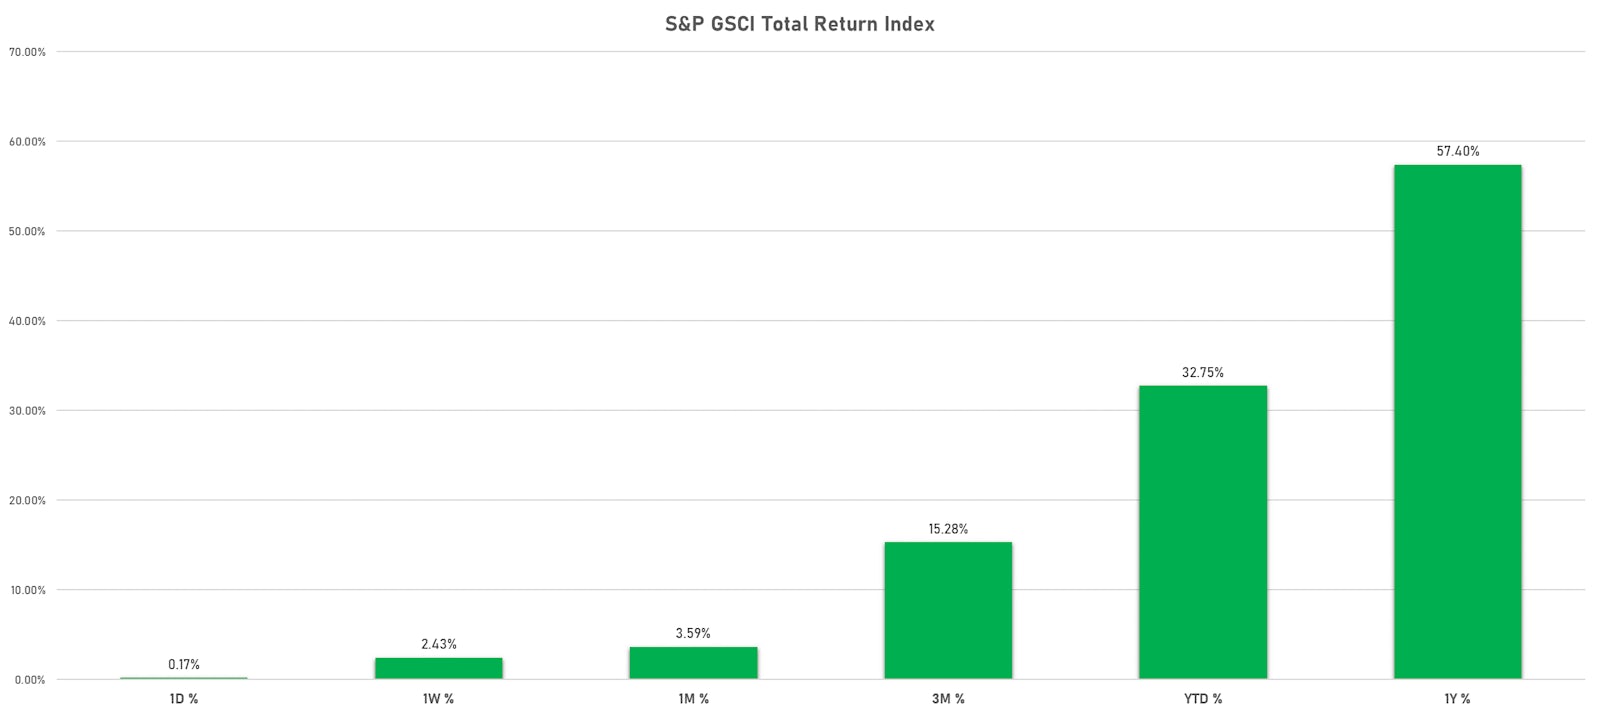 S&P GSCI Total Return Index Performance | Sources: ϕpost, FactSet data